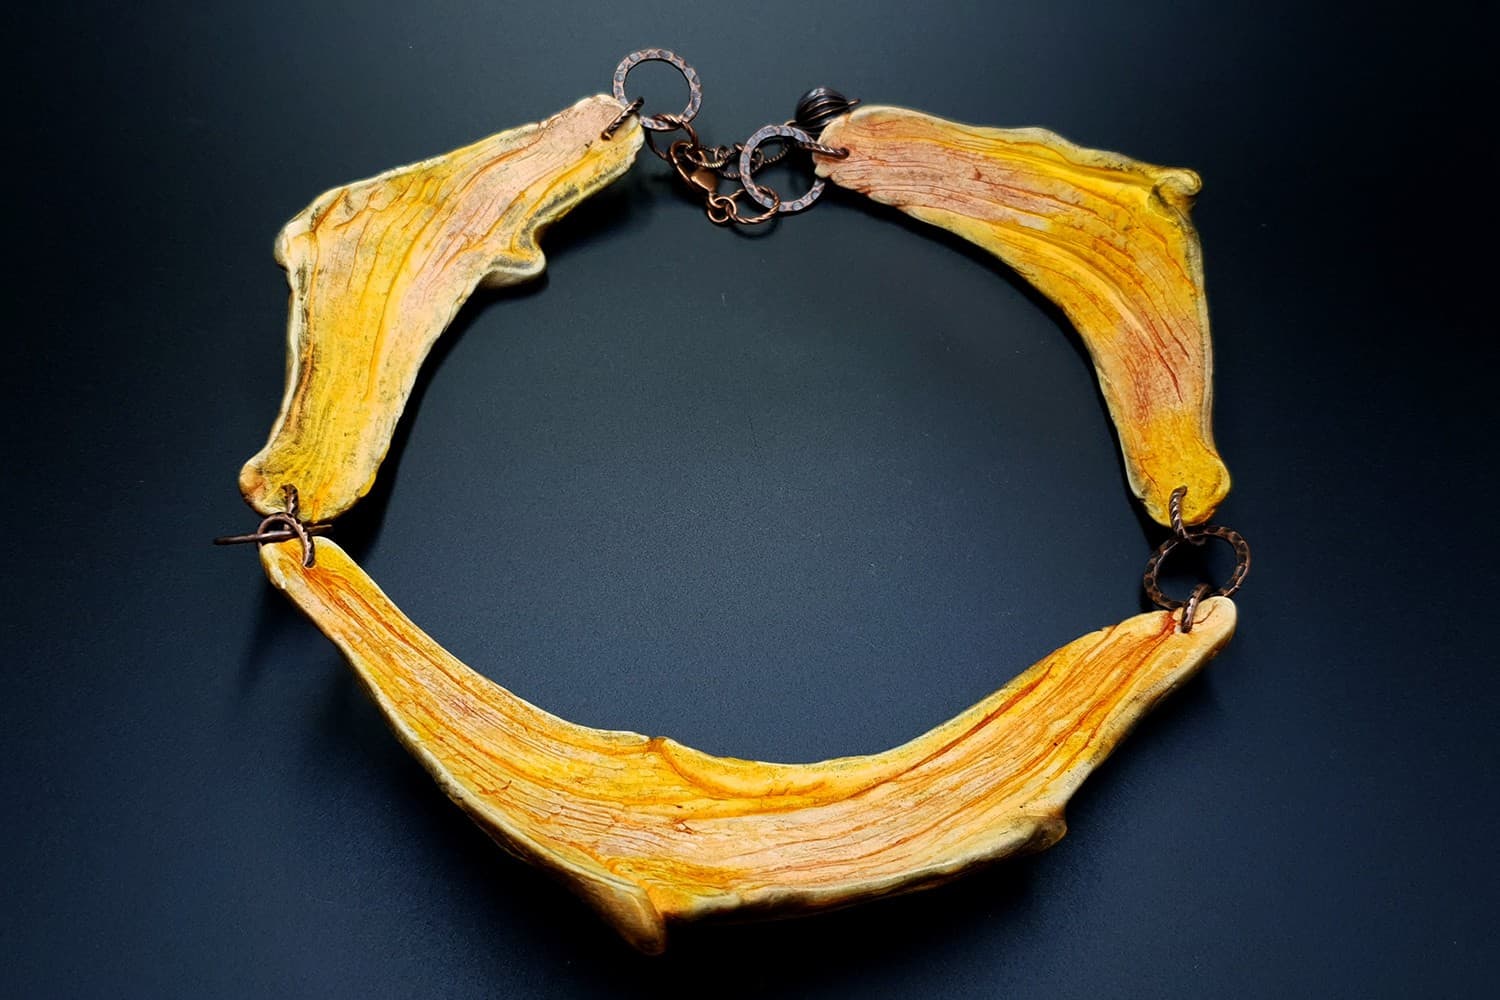 "River Wood" Necklace (1879)